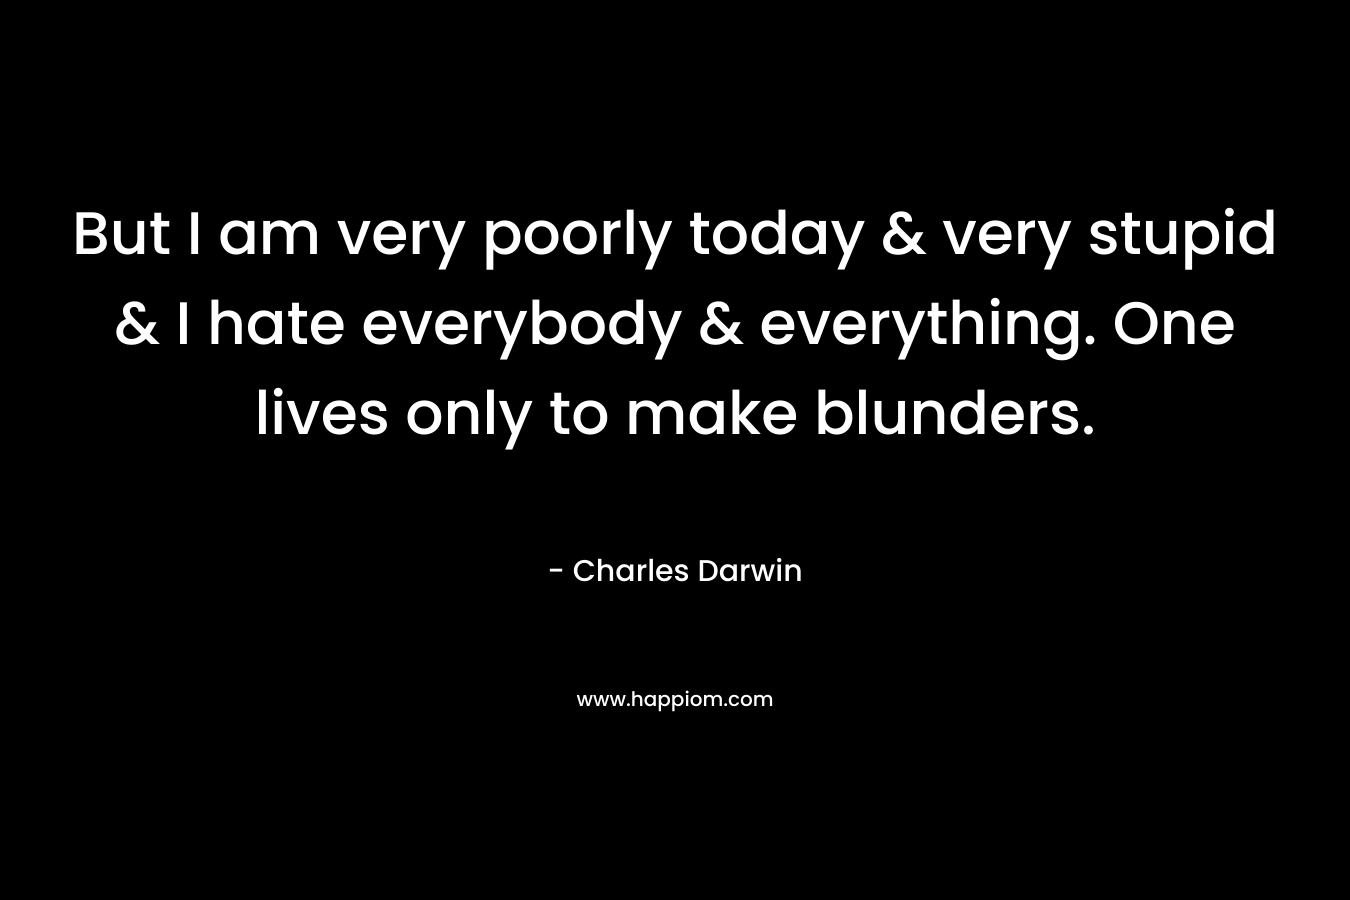 But I am very poorly today & very stupid & I hate everybody & everything. One lives only to make blunders.